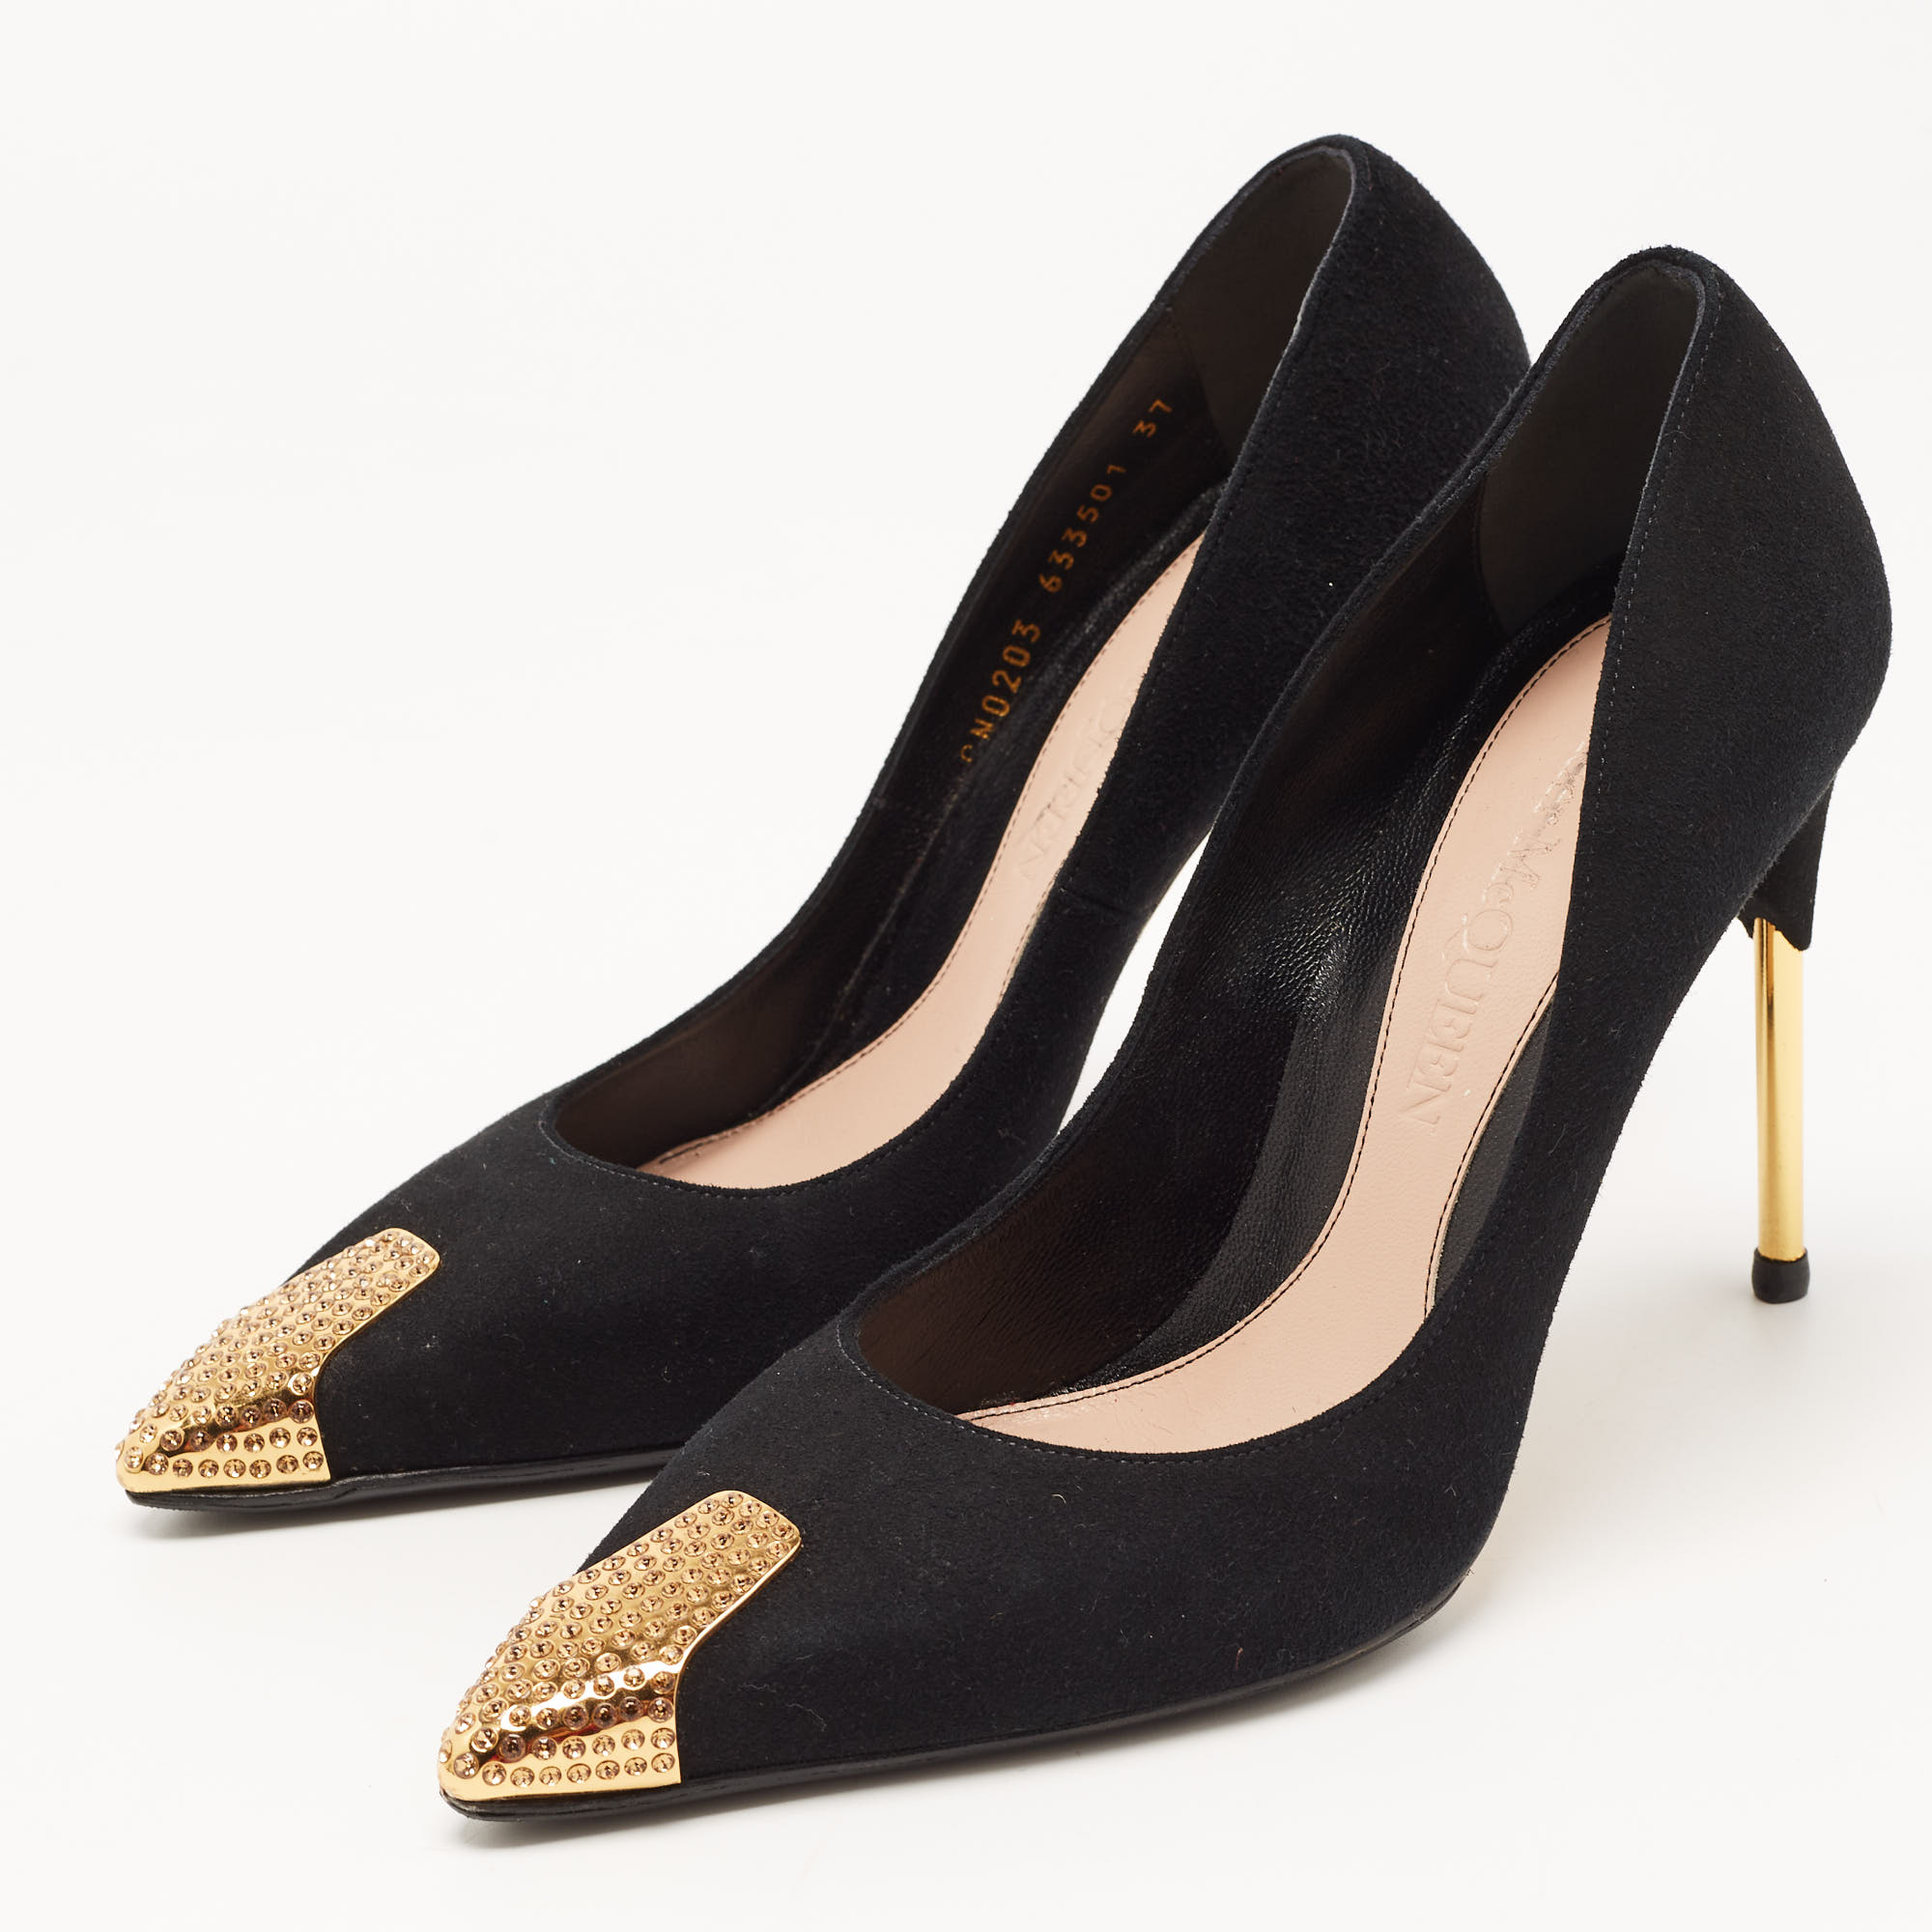 

Alexander McQueen Black Suede Leather Embellished Pointed Toe Pumps Size